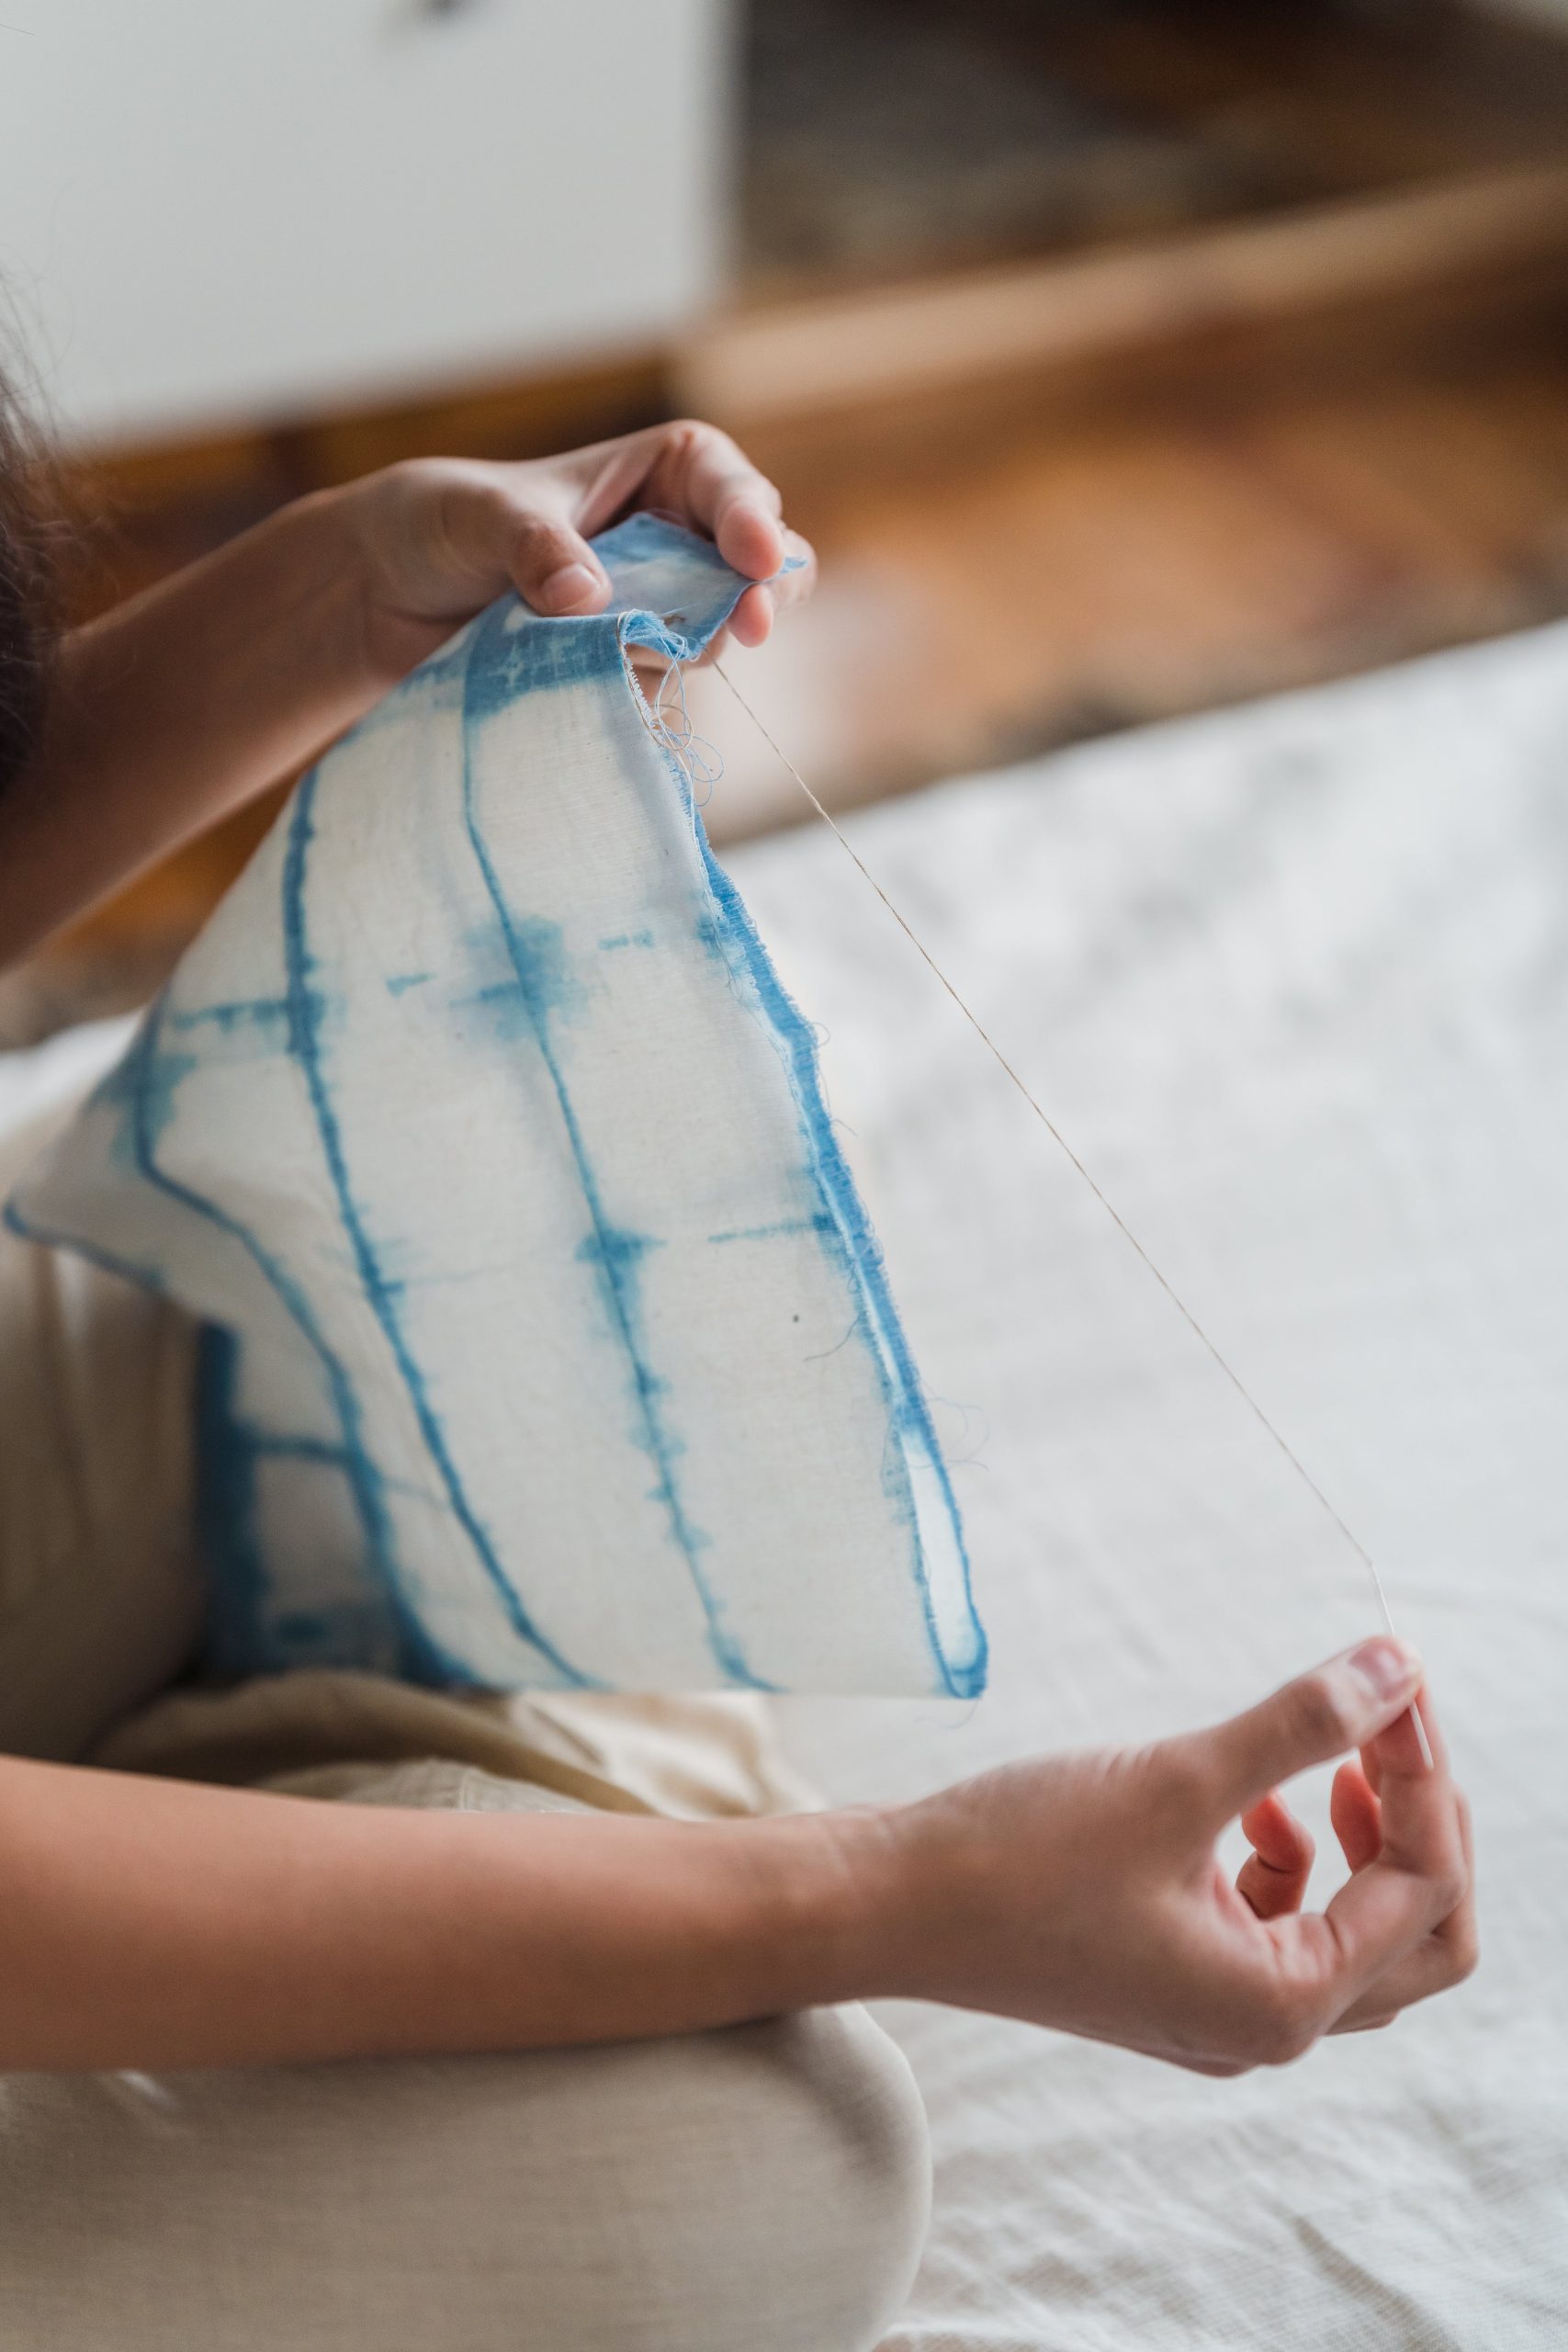 HOW TO SEW STITCHES BY HAND